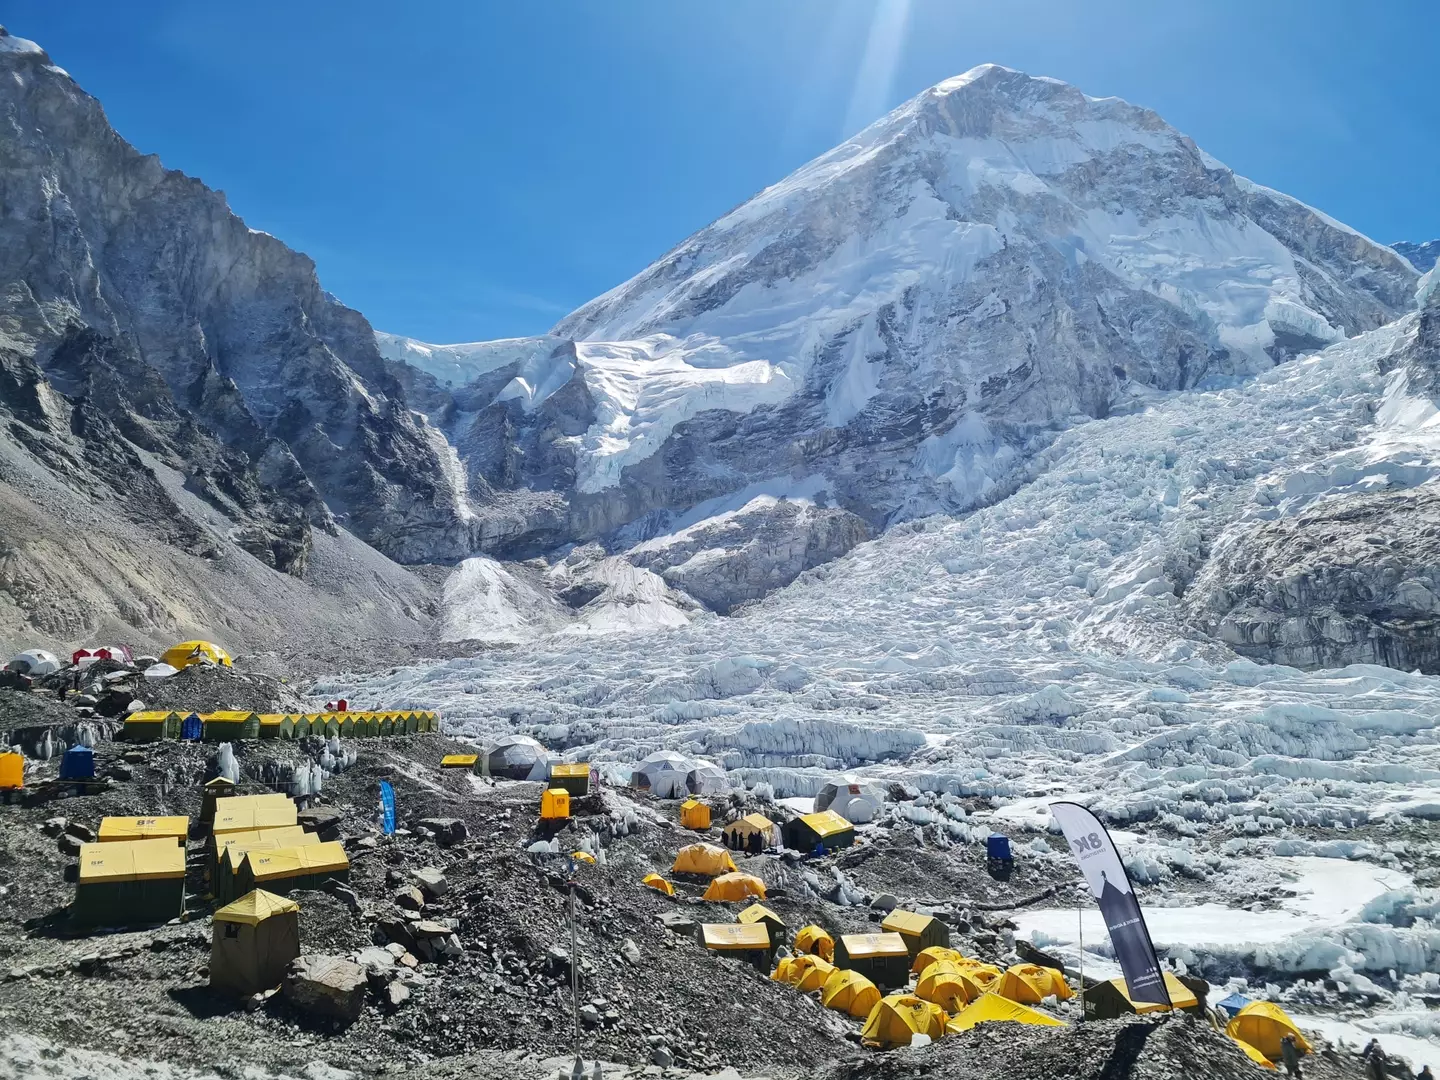 Many people have died climbing PURNIMA SHRESTHA/AFP via Getty Images) Mount Everest 